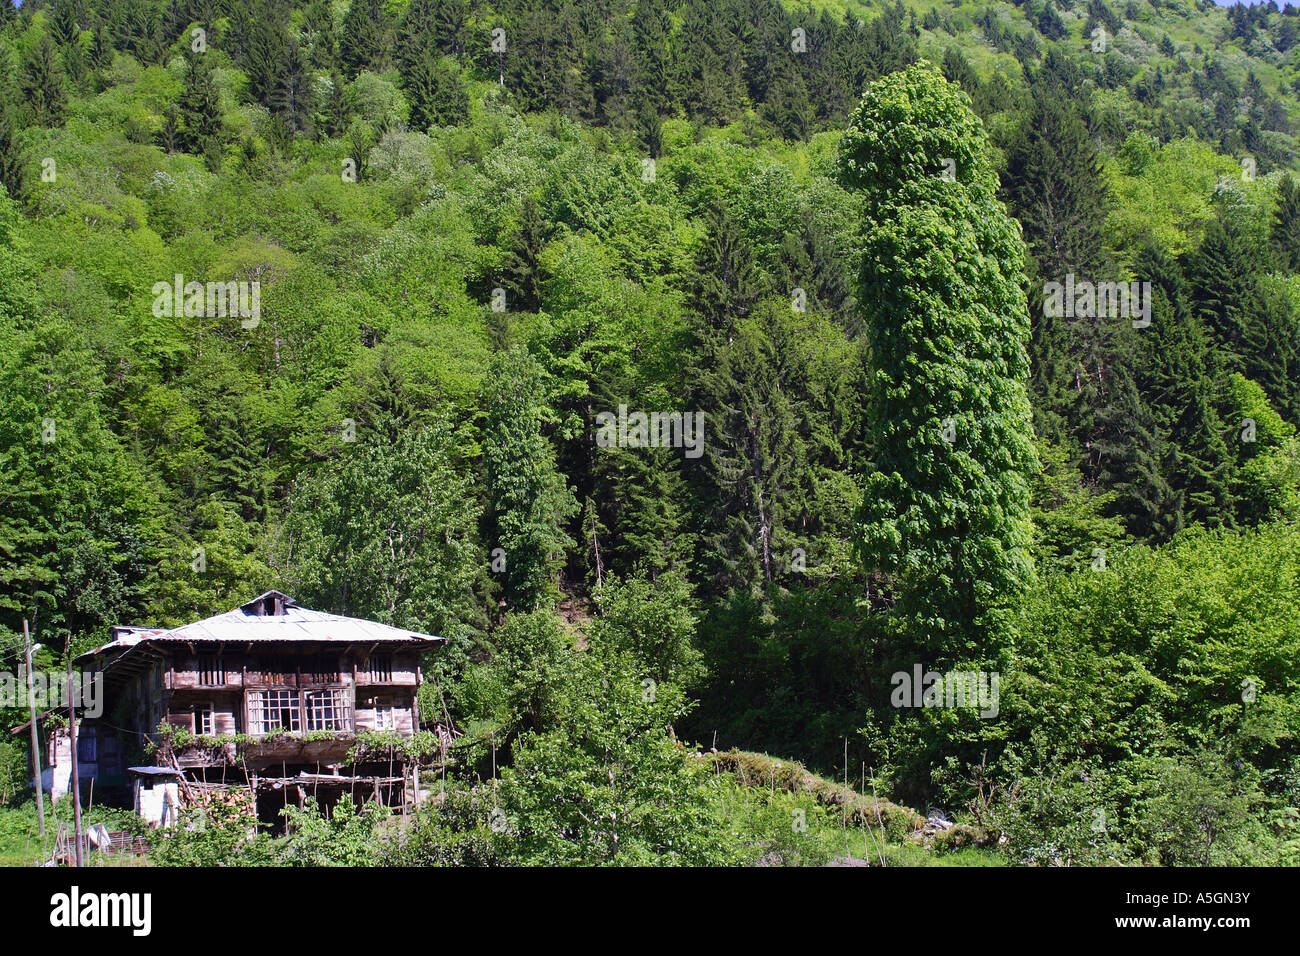 oriental beeches and oriental spruces (Fagus orientalis, Picea orientalis), mixed forest with typical frame cottage, Turkey, Sc Stock Photo